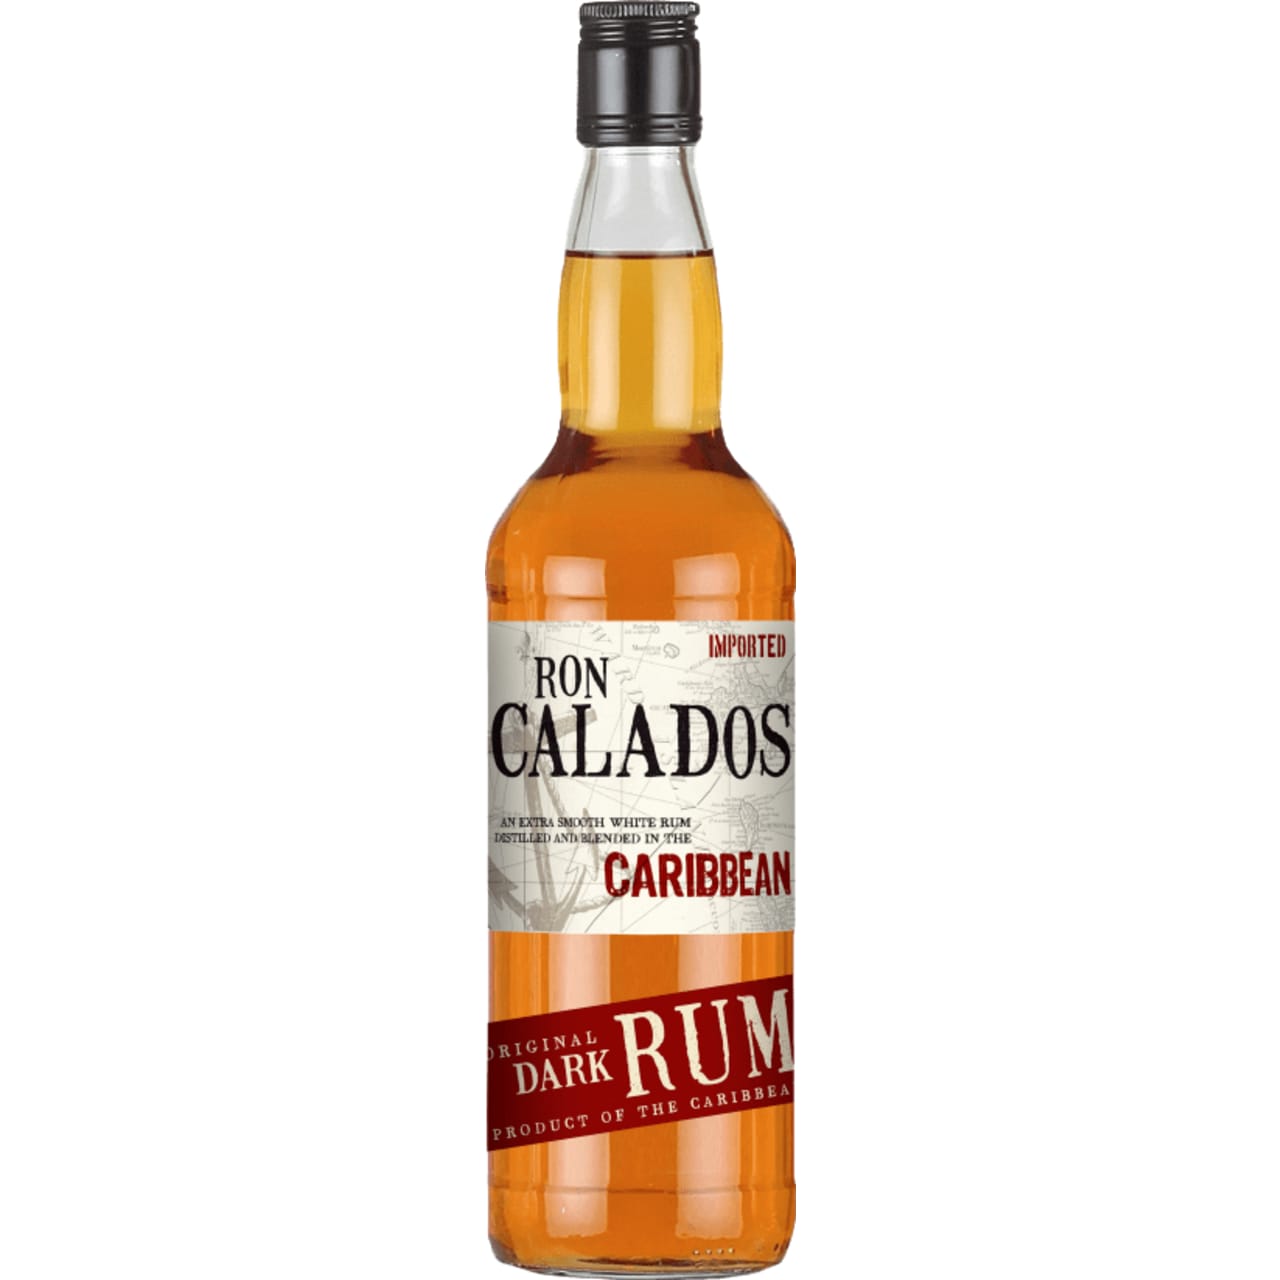 Ron Calados Dark Premium House Rum is a dark rum that is great for mixing in all your favourite cocktails.